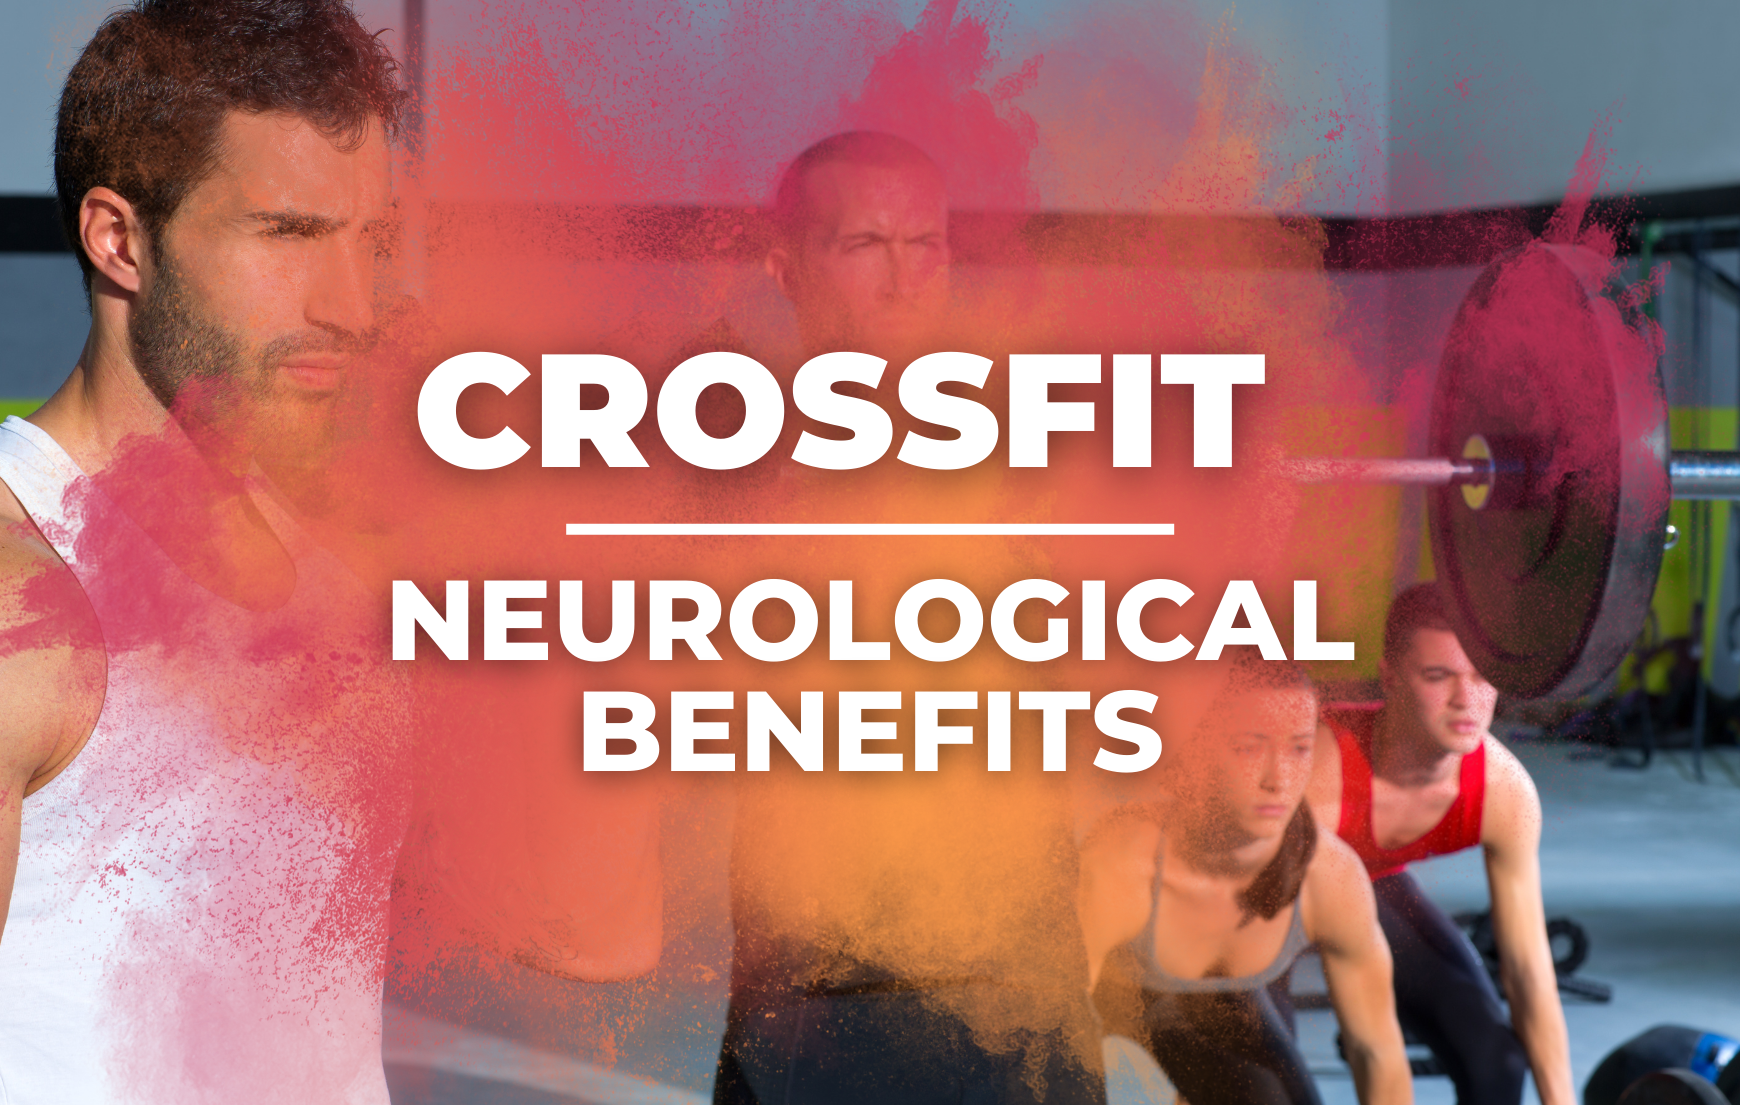 The Neurological Benefits of CrossFit: Research Findings